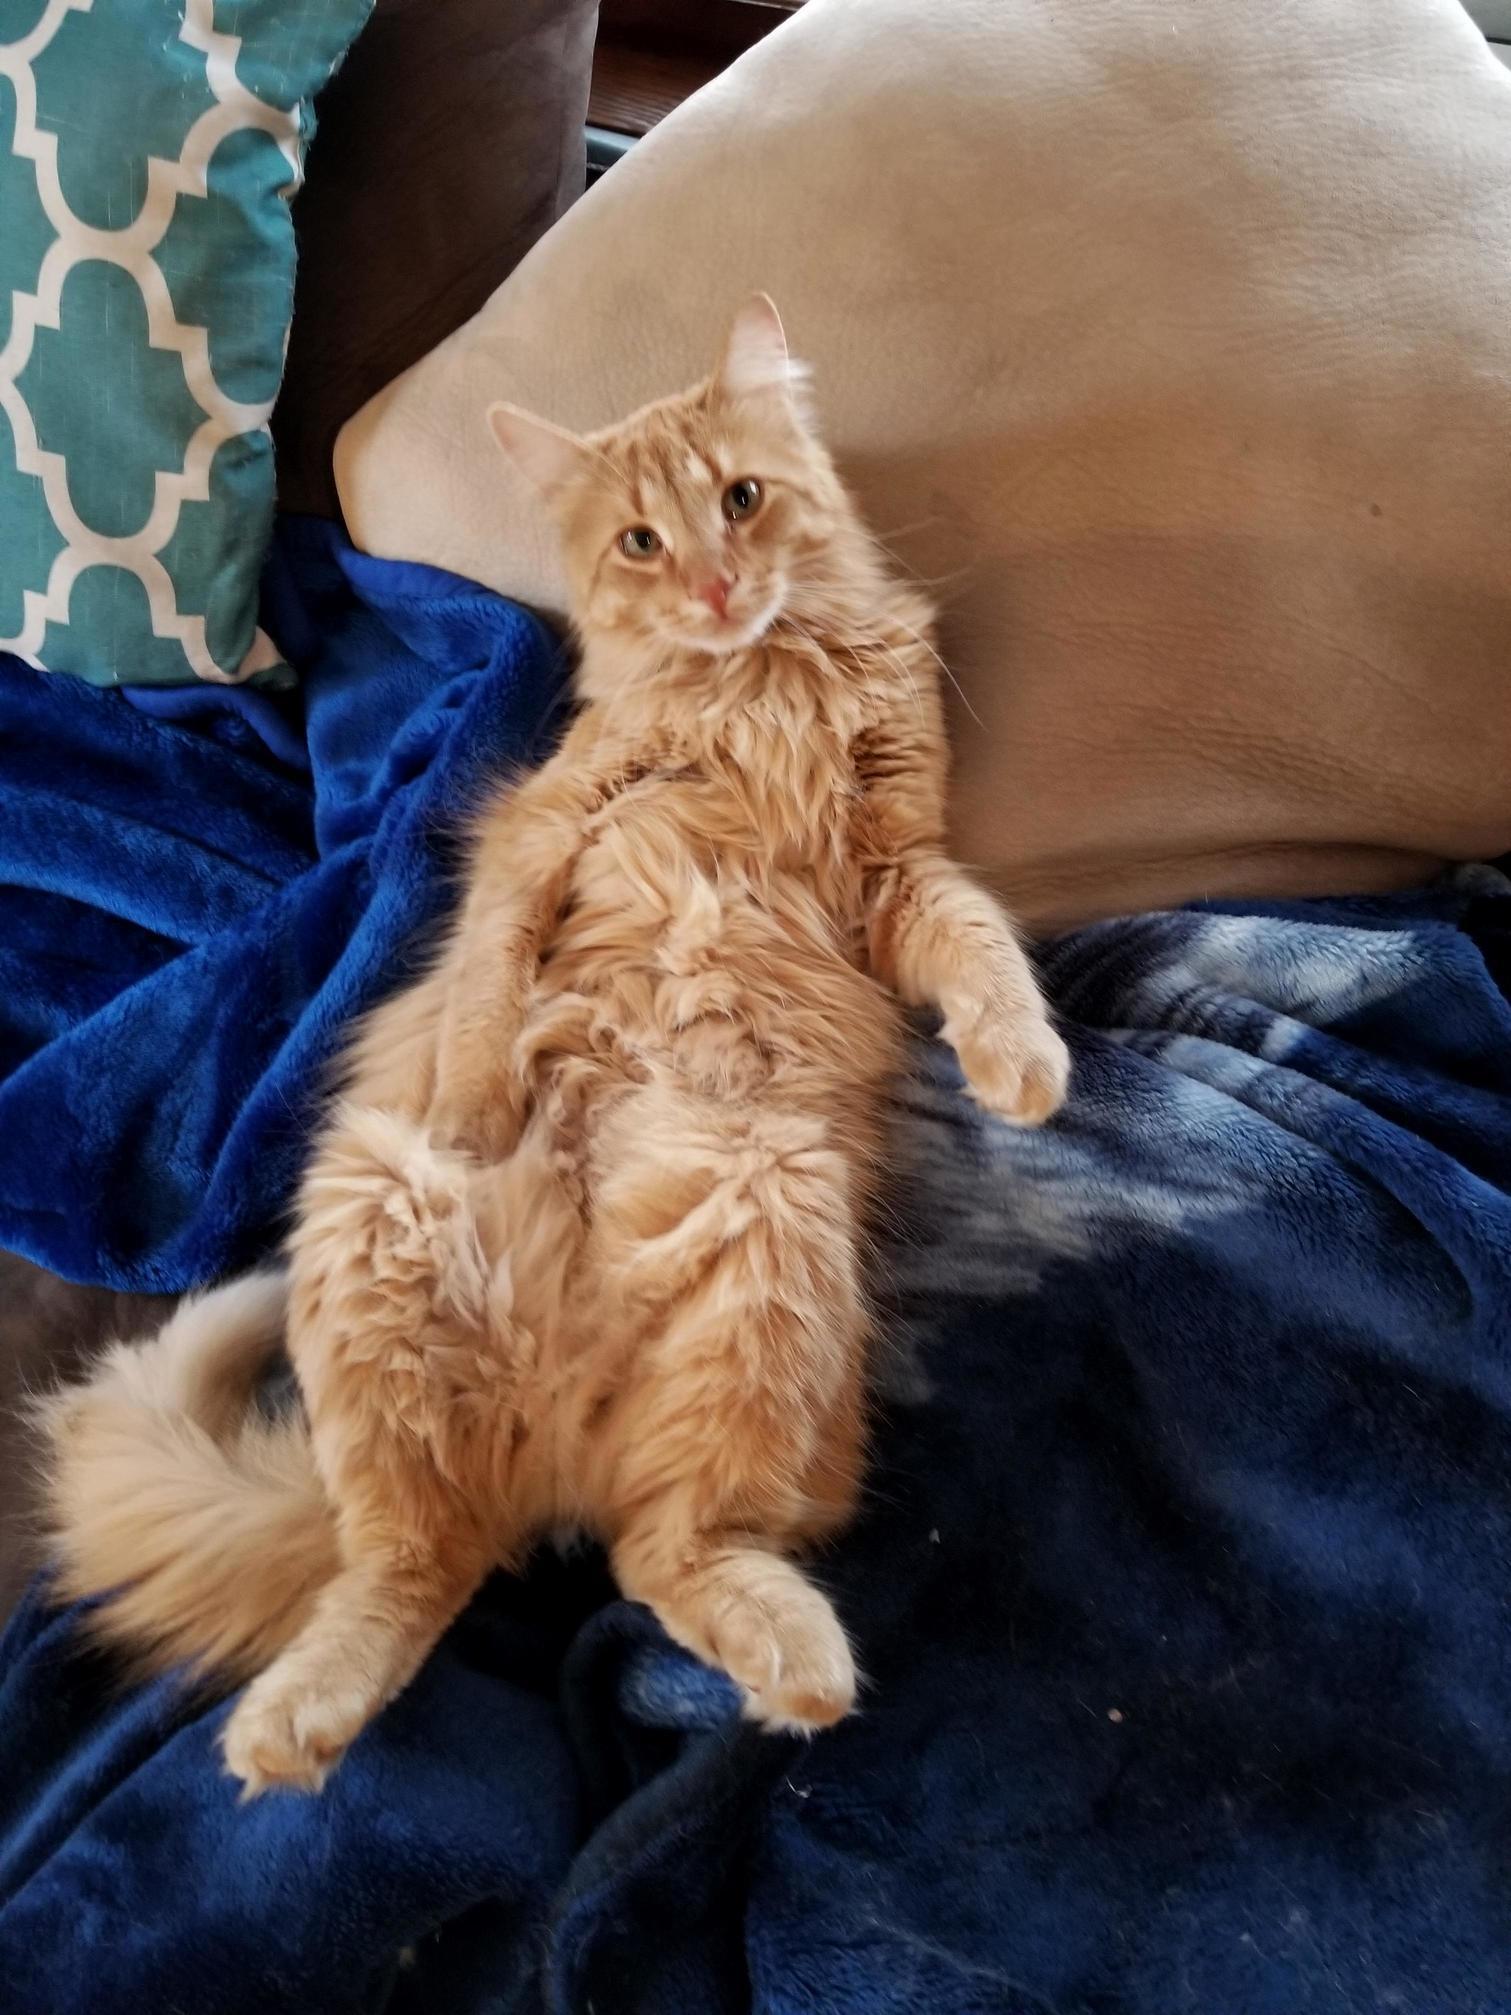 Paul the cat likes to lay on his back.